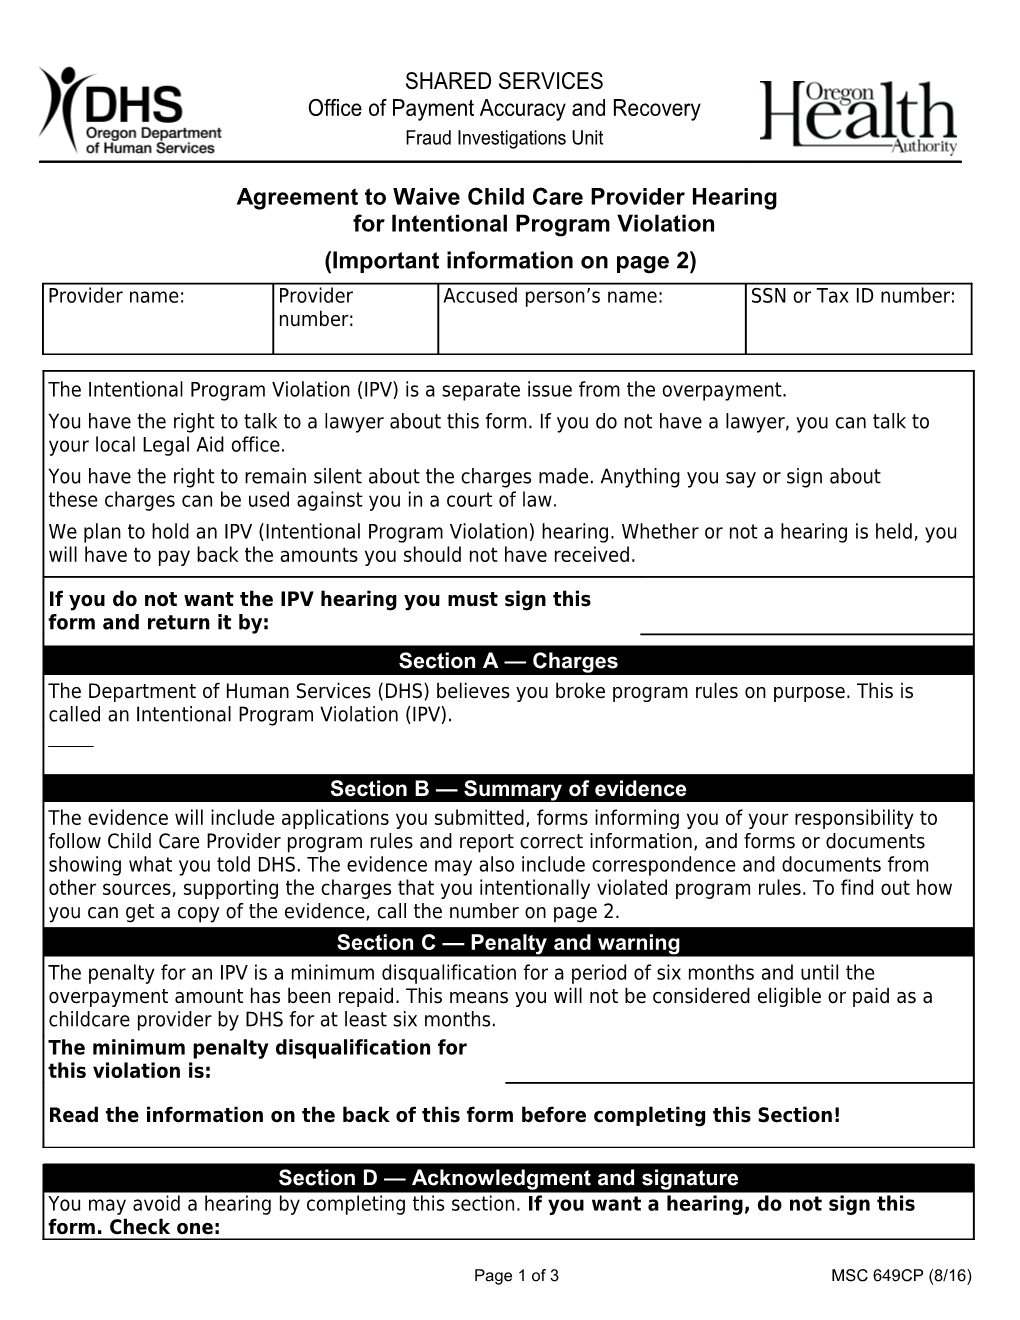 Agreement to Waive Child Care Provider Hearing MSC 649CP 11/11